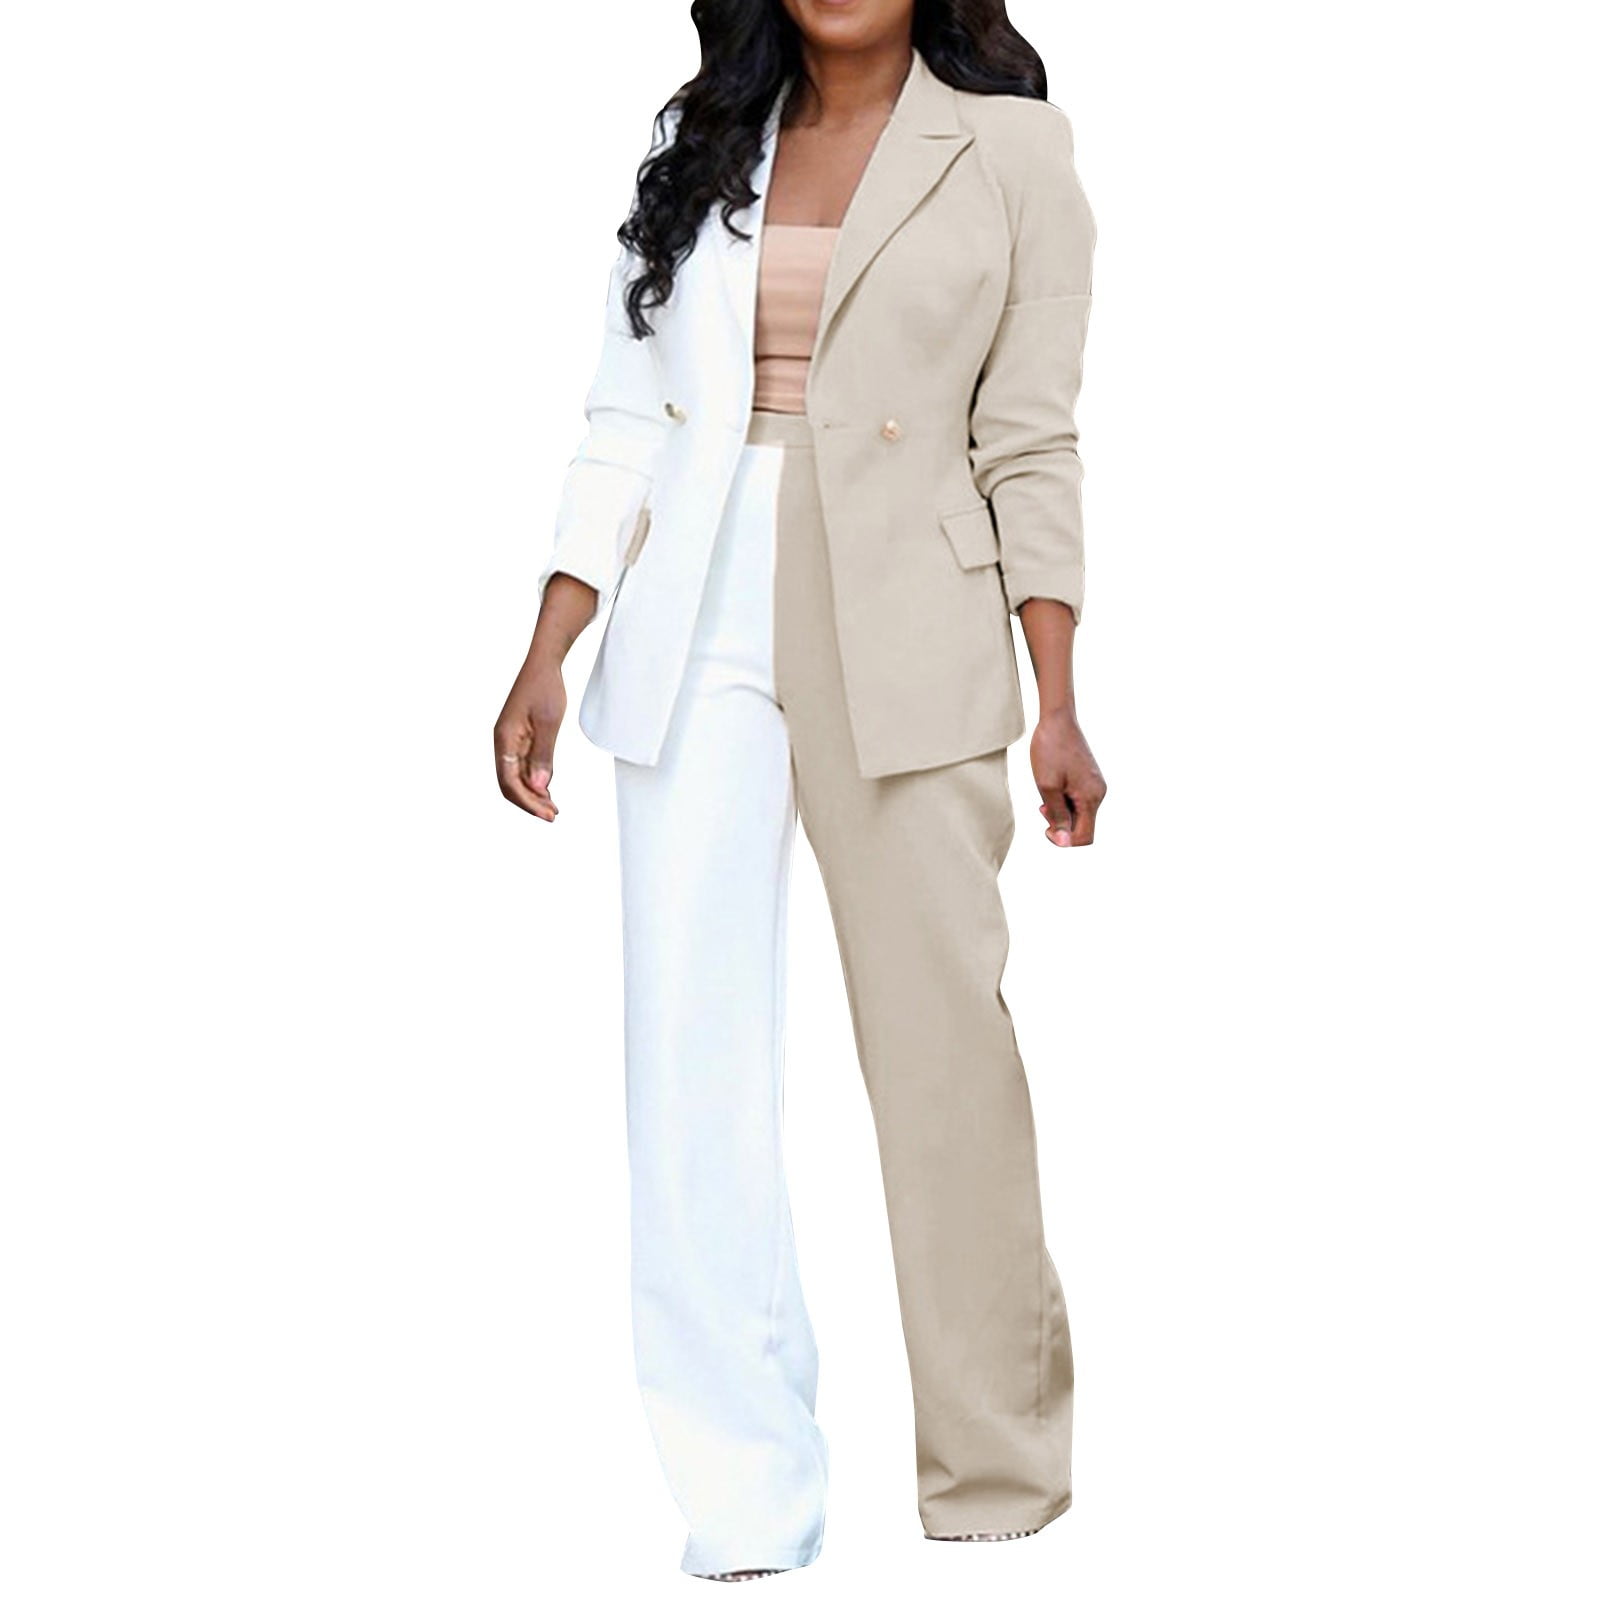 NKOOGH Pant Suits for Women Dressy Wedding Guest Plus Size Two